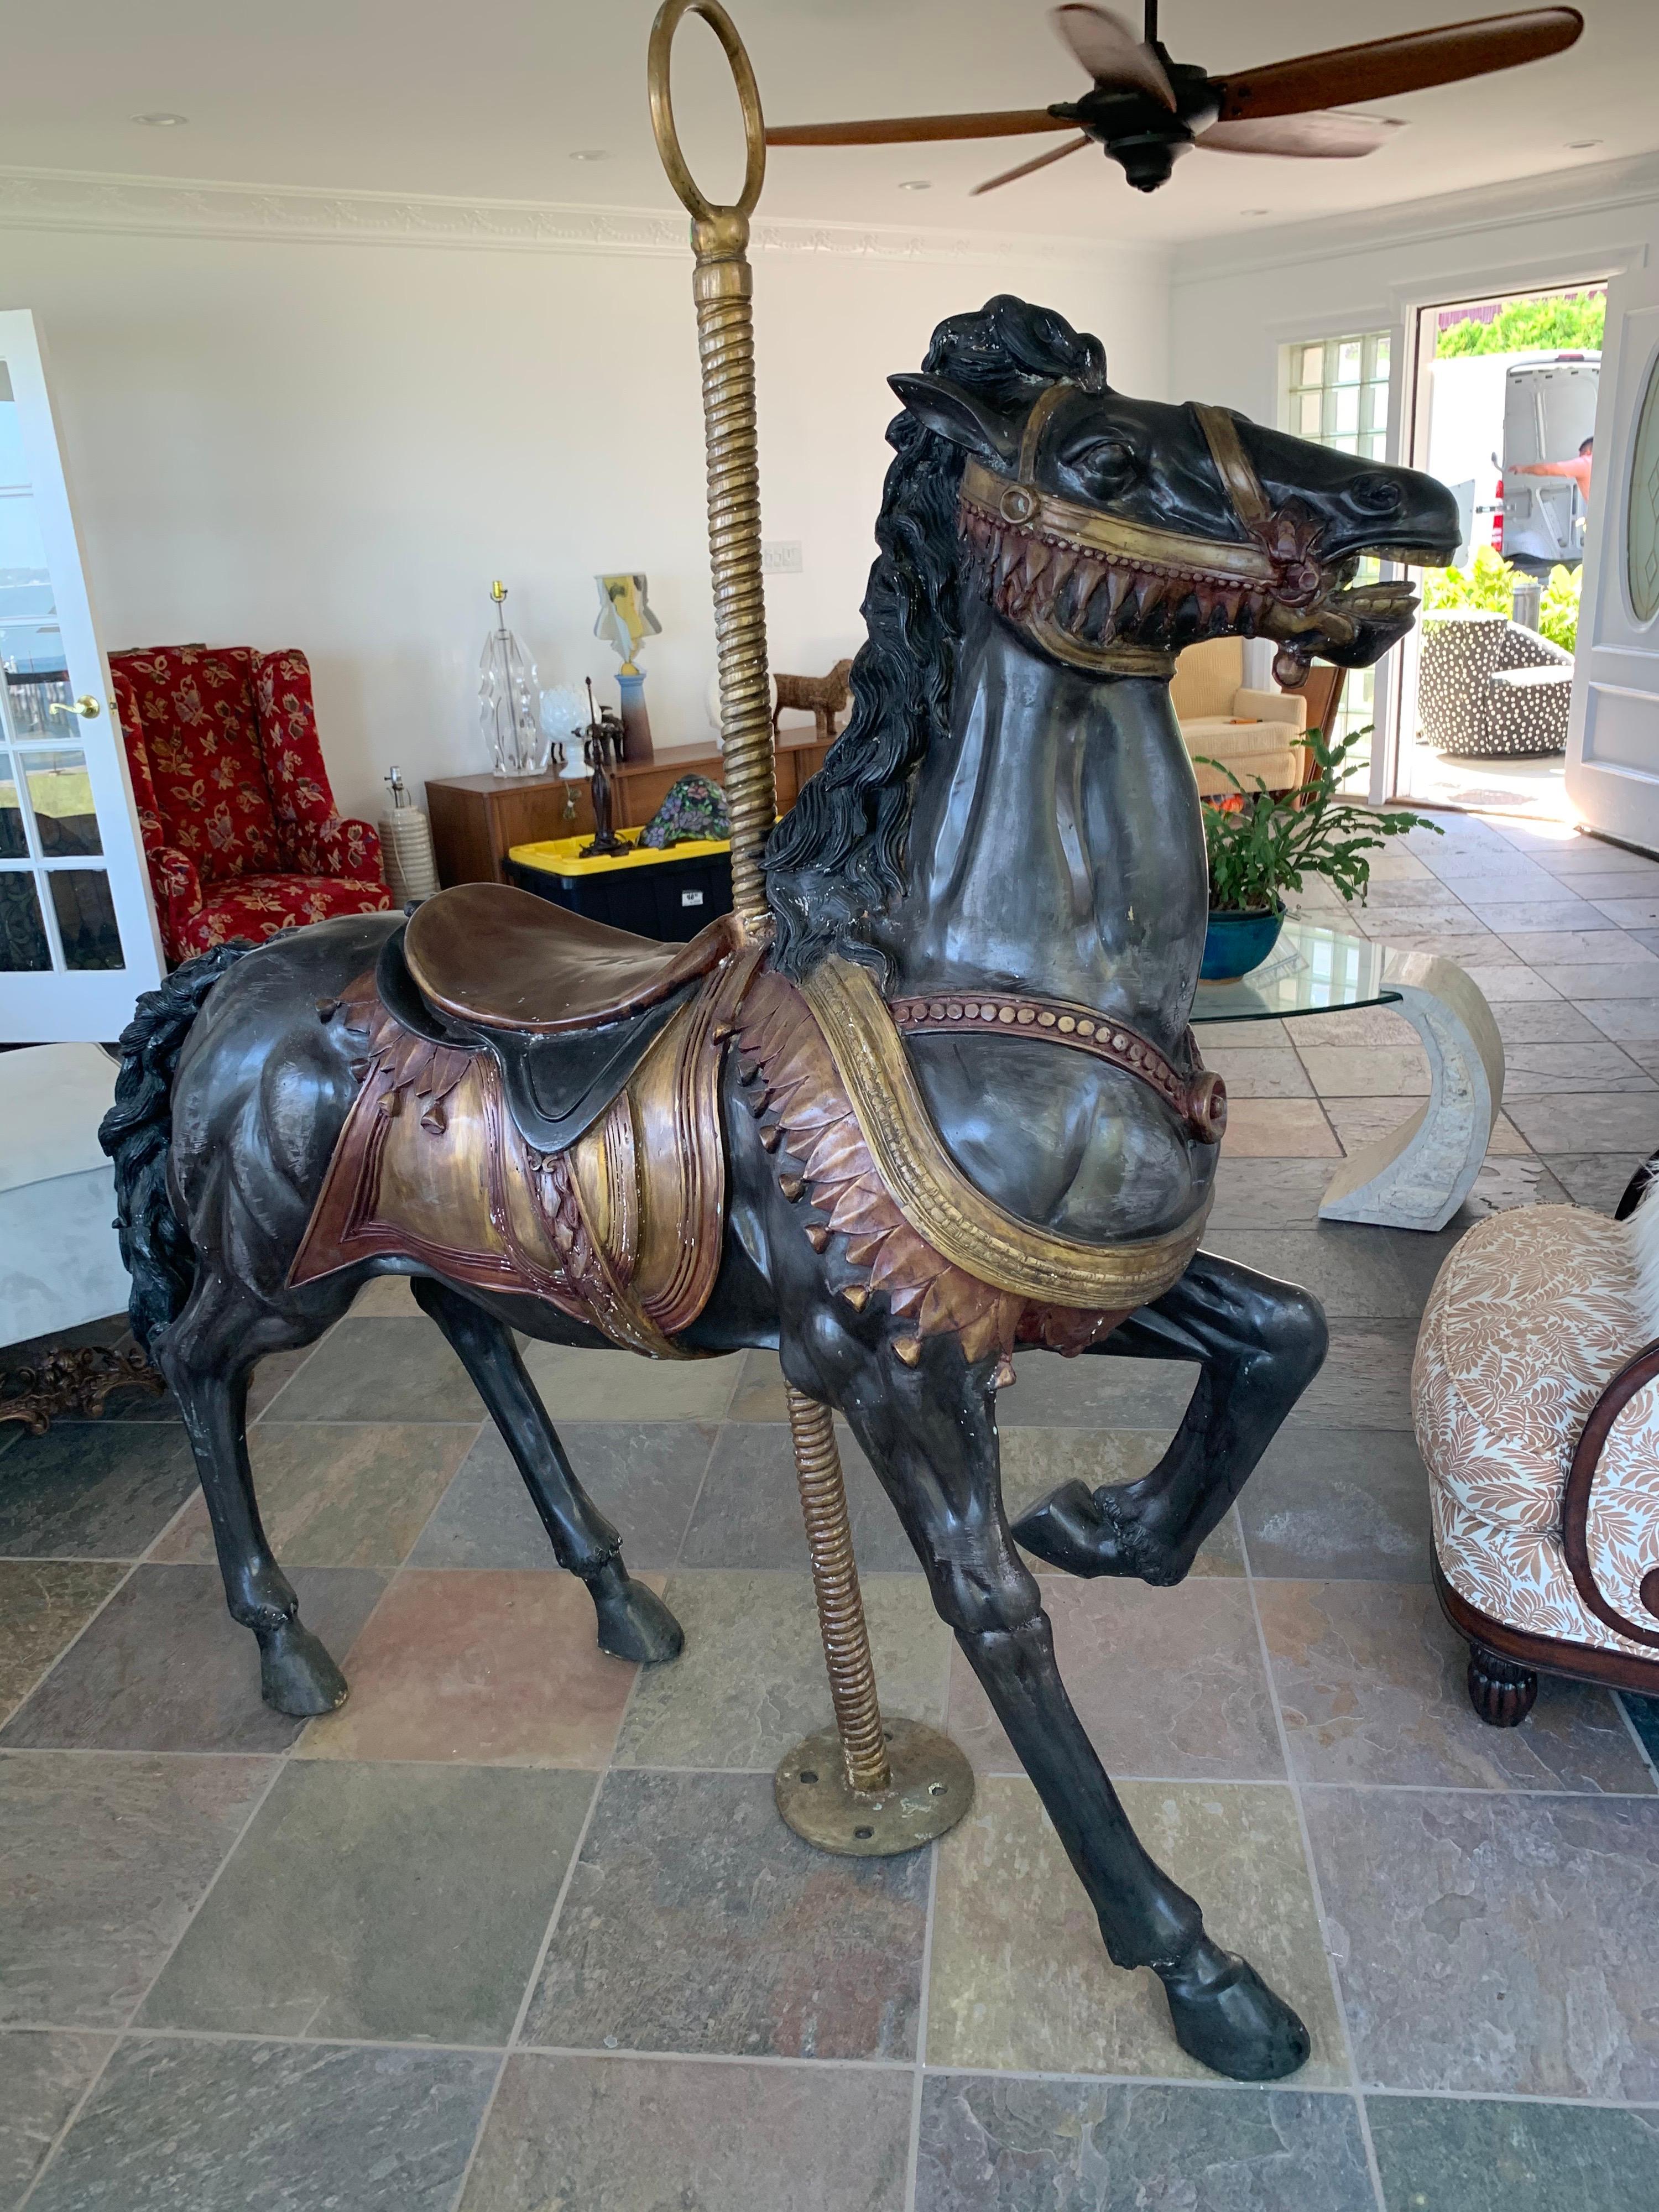 Magnificent antique carousel horse sculpture, all original. All dimensions are below. This is a large and heavy sculpture. The weight is approximately 210 pounds. Now, more than ever, home is where the heart is.